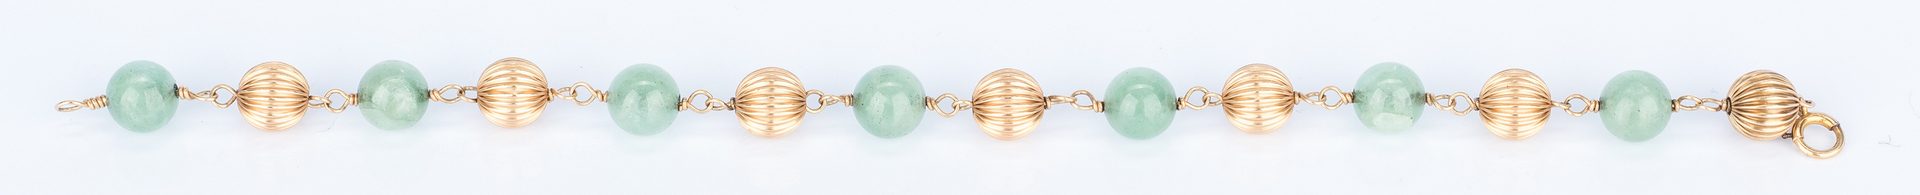 Lot 757: 7 Gold and Nephrite Jade Jewelry items